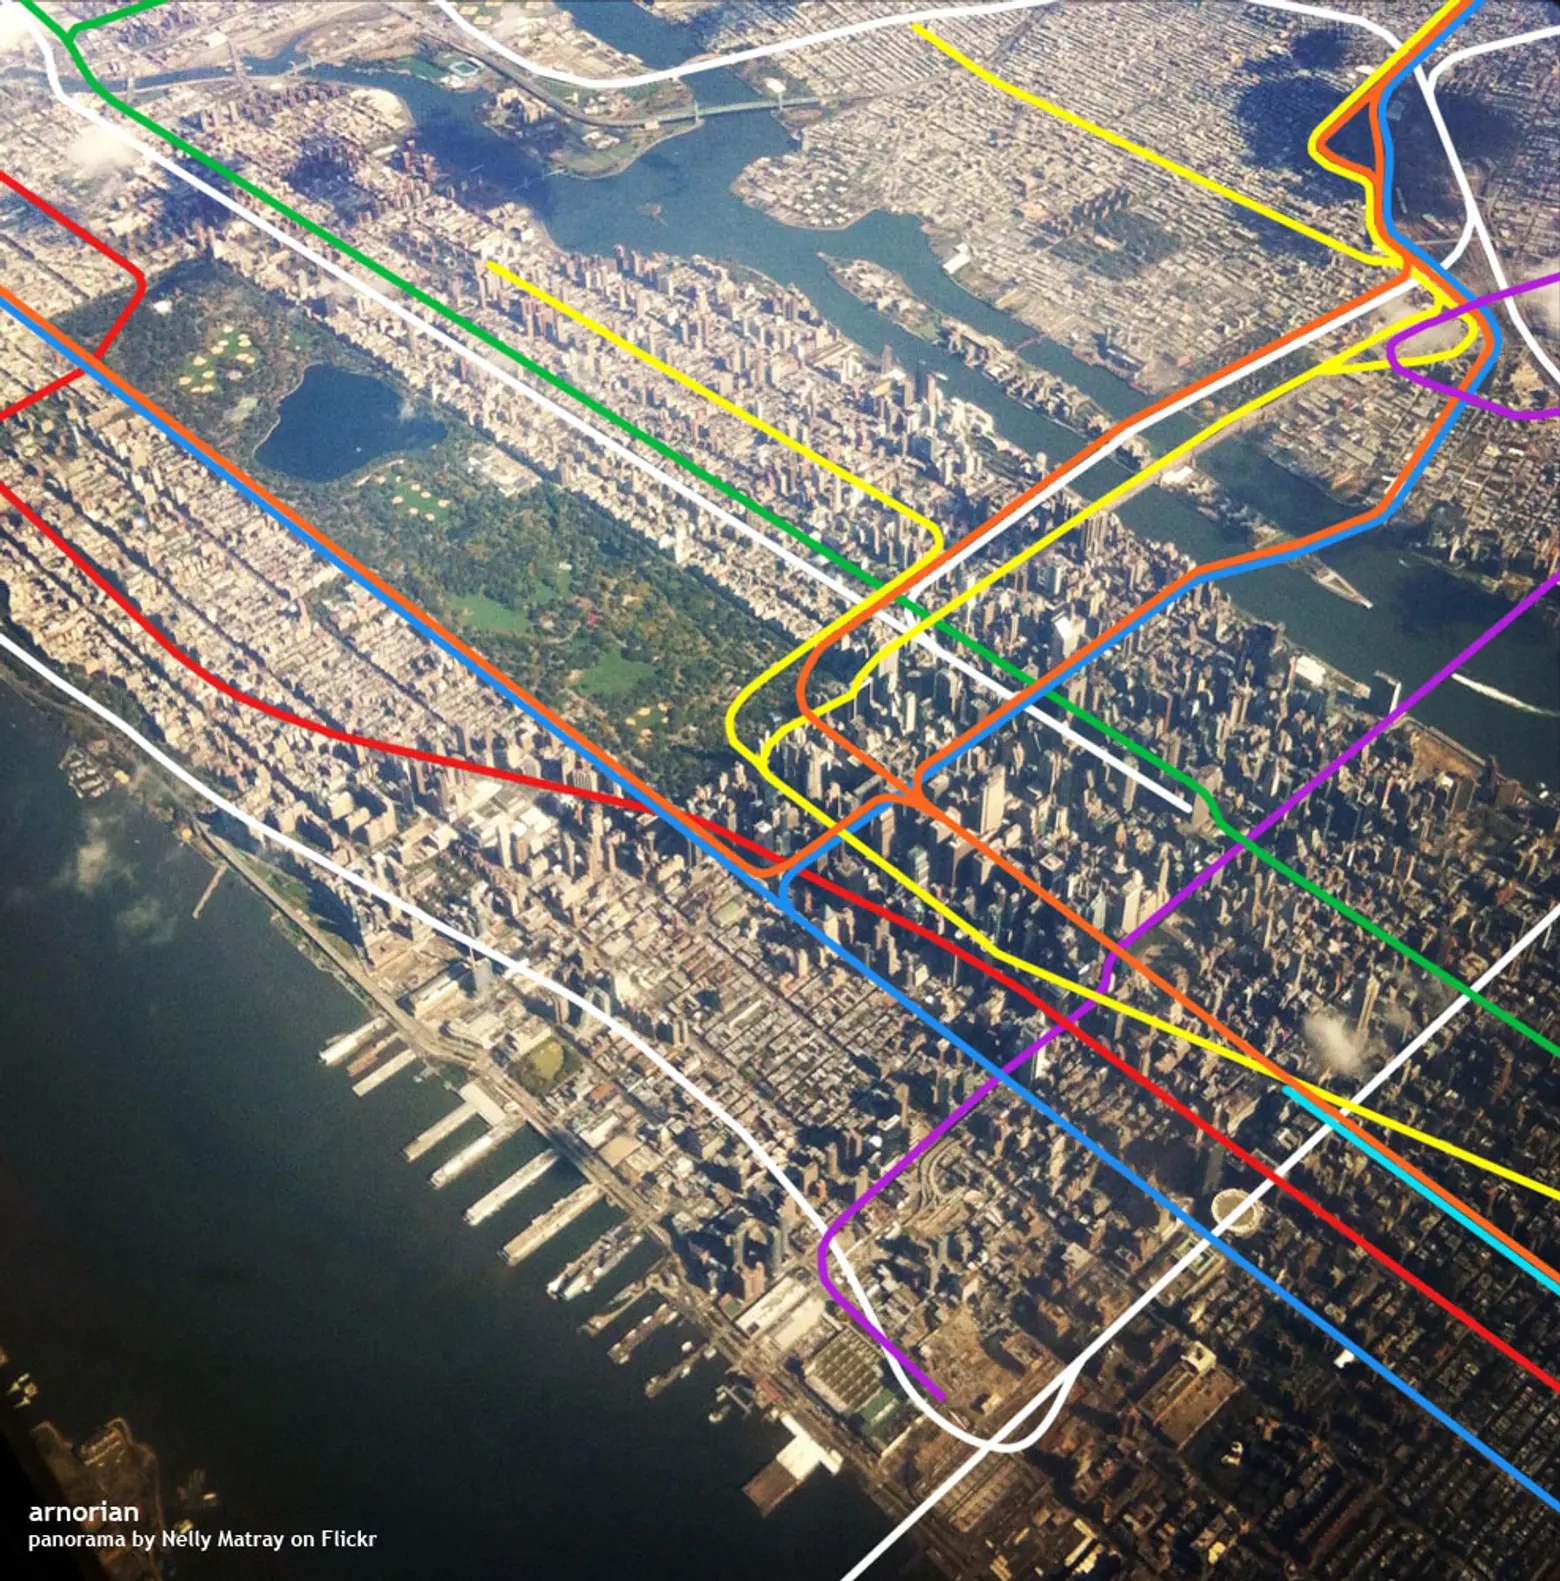 nyc subway system map overlaid over manhattan aerial image, nyc subway aerial